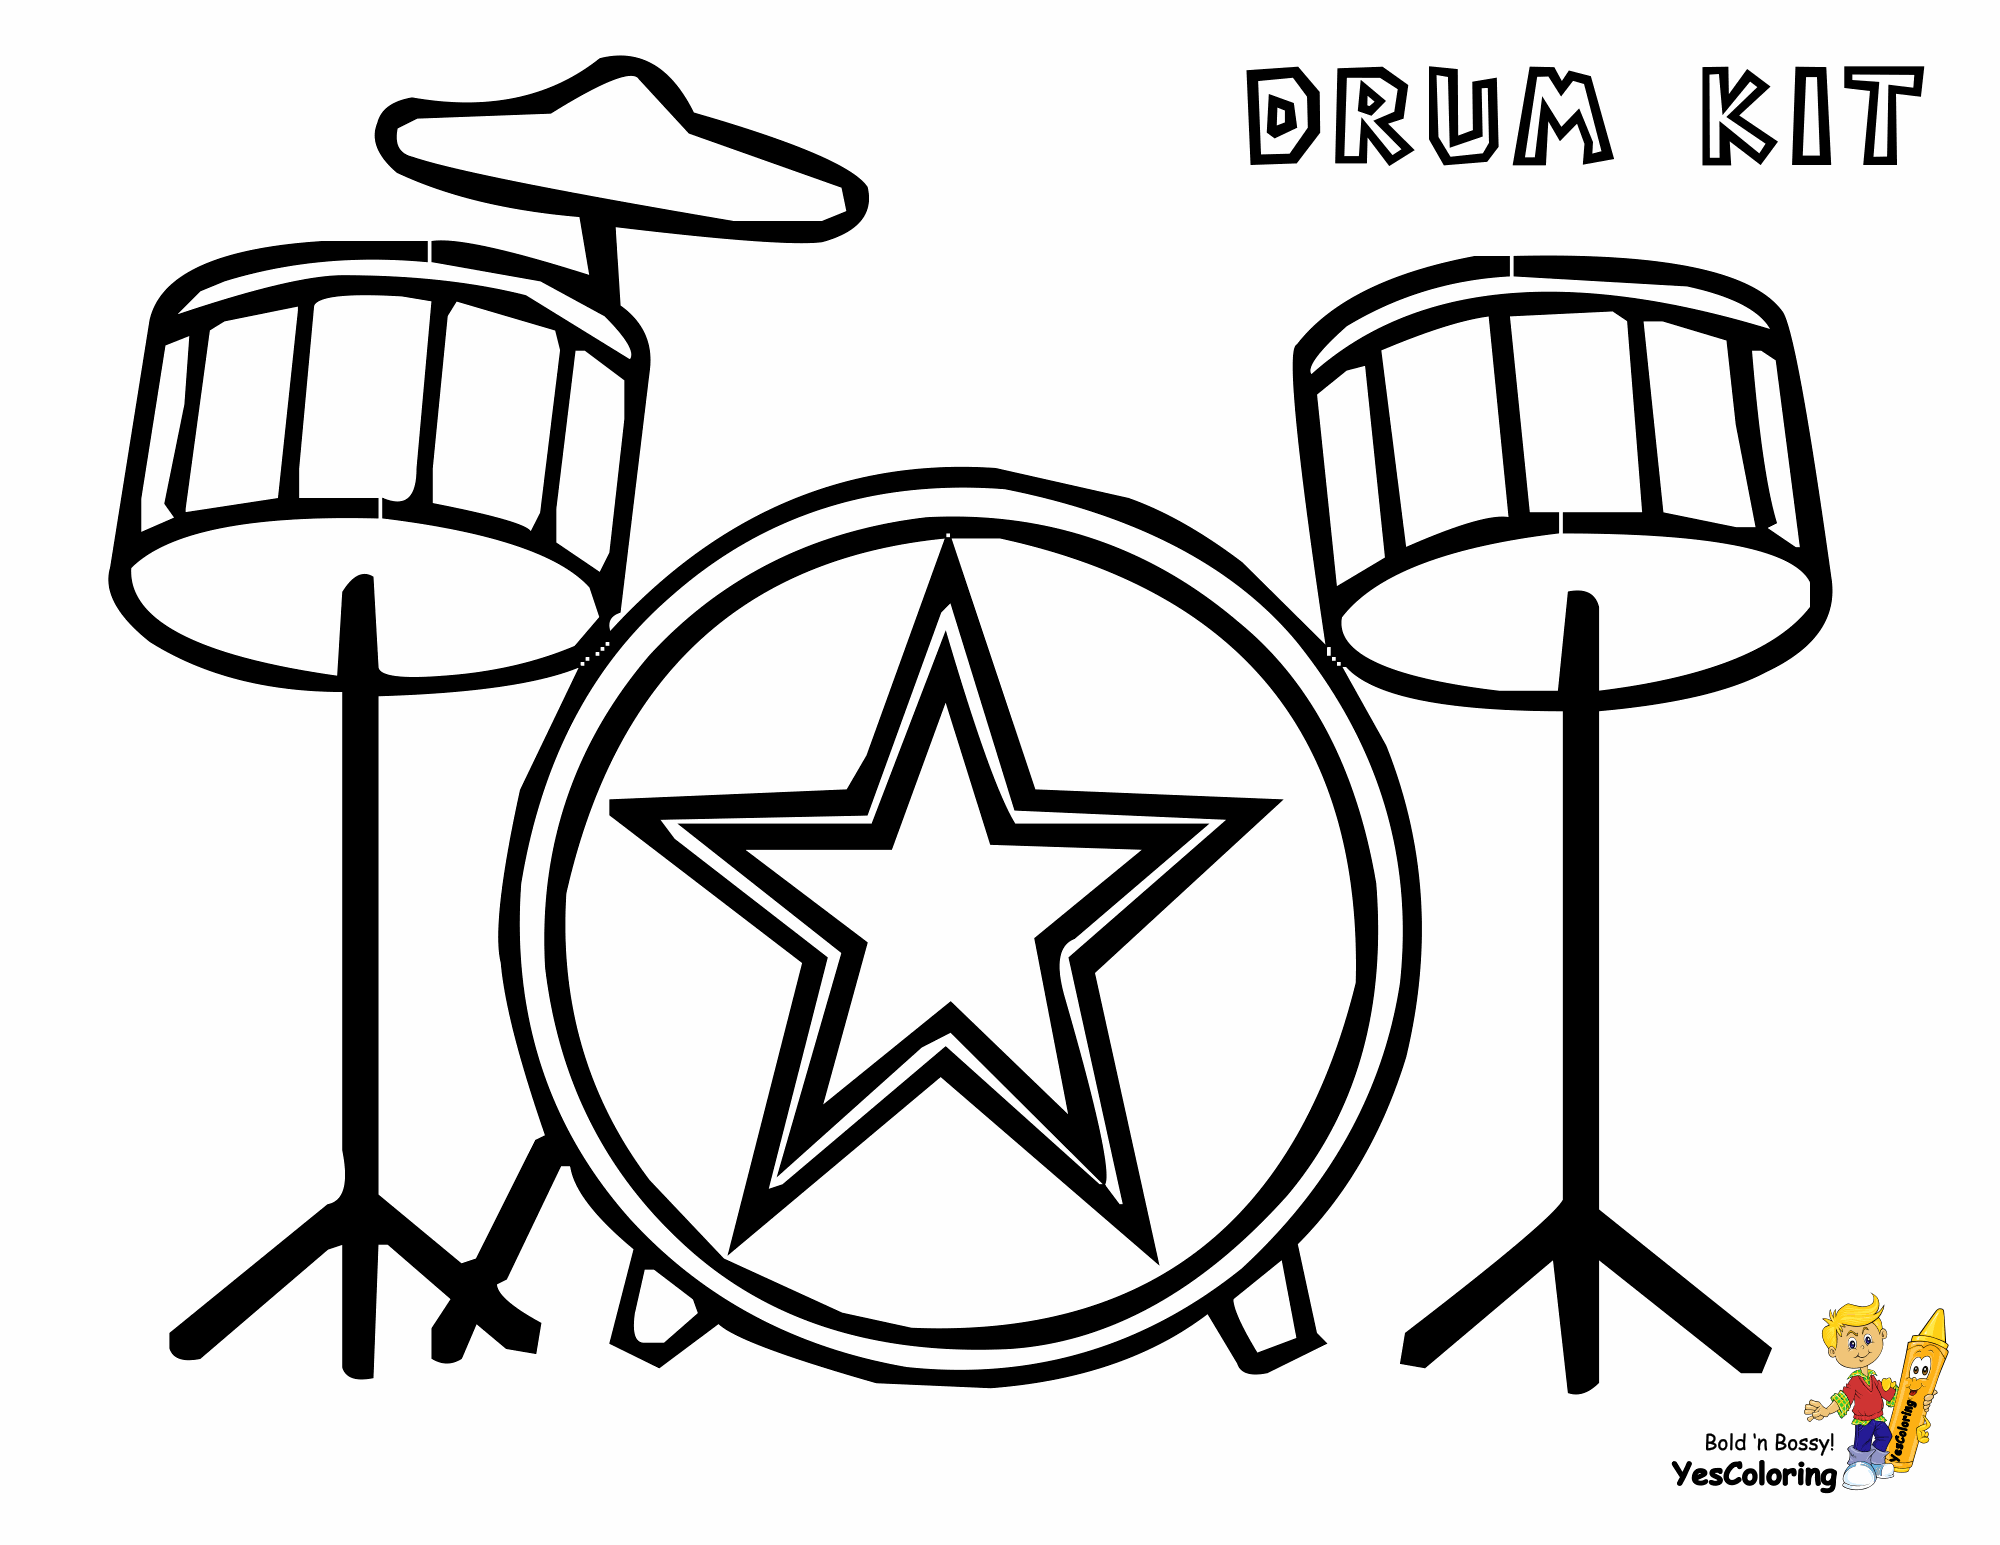 drums coloring page marching drum coloring page free clip art drums coloring page 